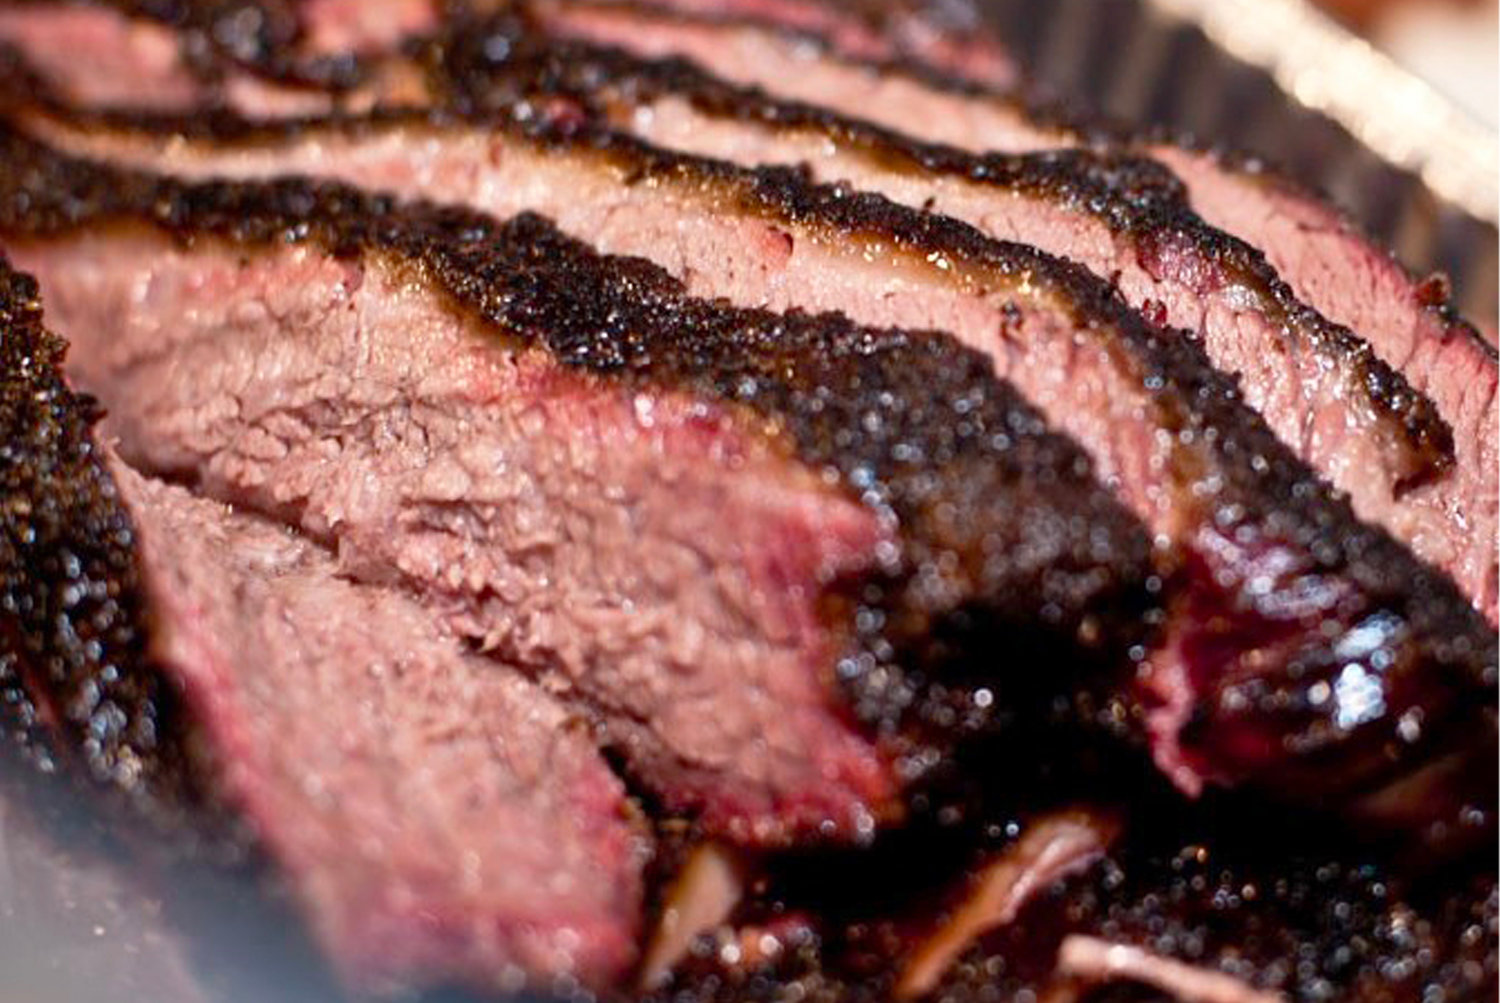 Brisket can be ordered solo or as a meal with sides